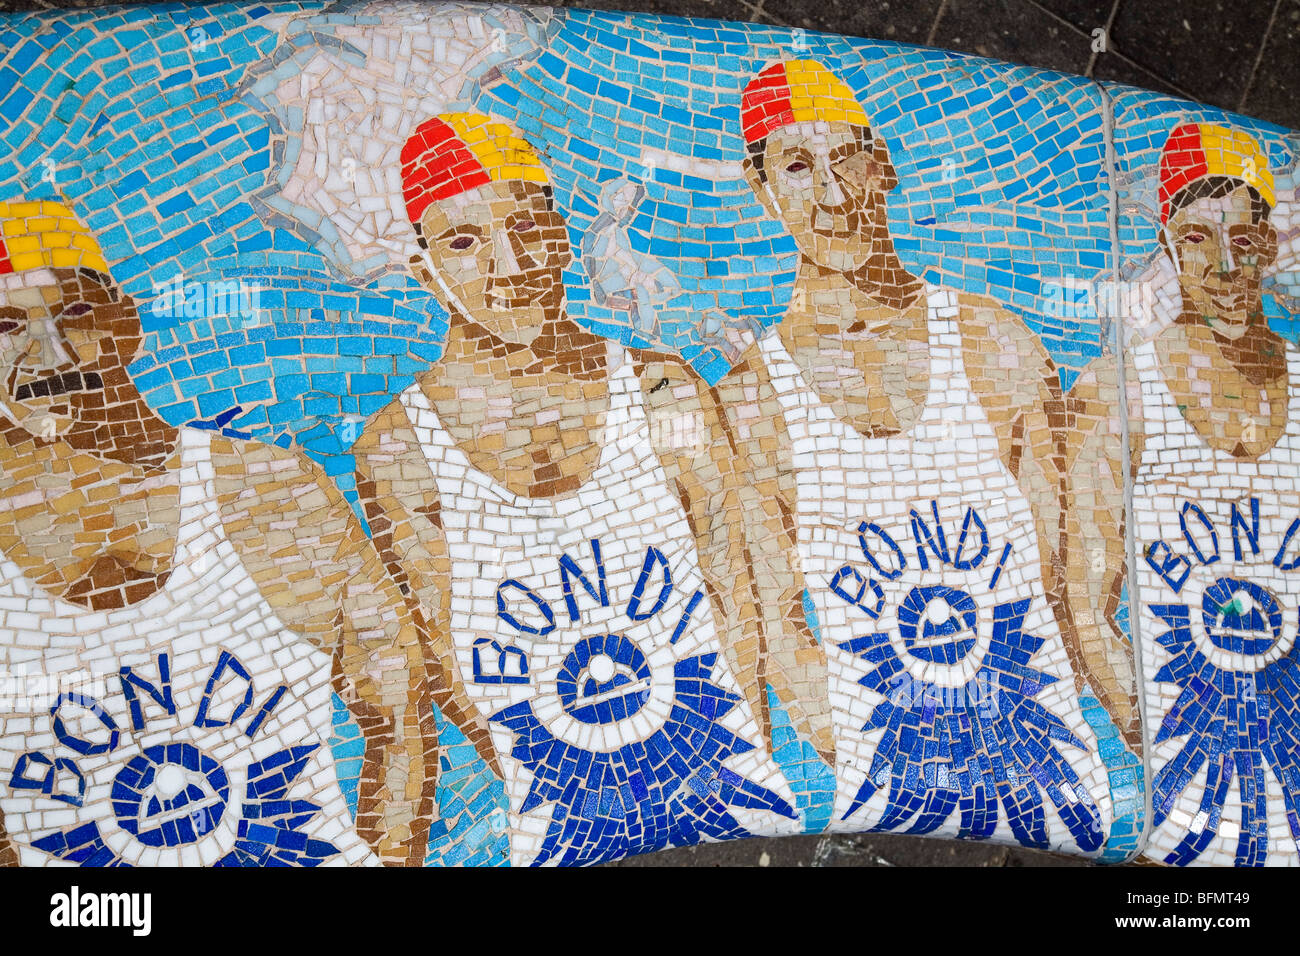 Australia, New South Wales, Sydney.  Surf lifesaving culture depicted in a mosaic at Bondi Beach. Stock Photo